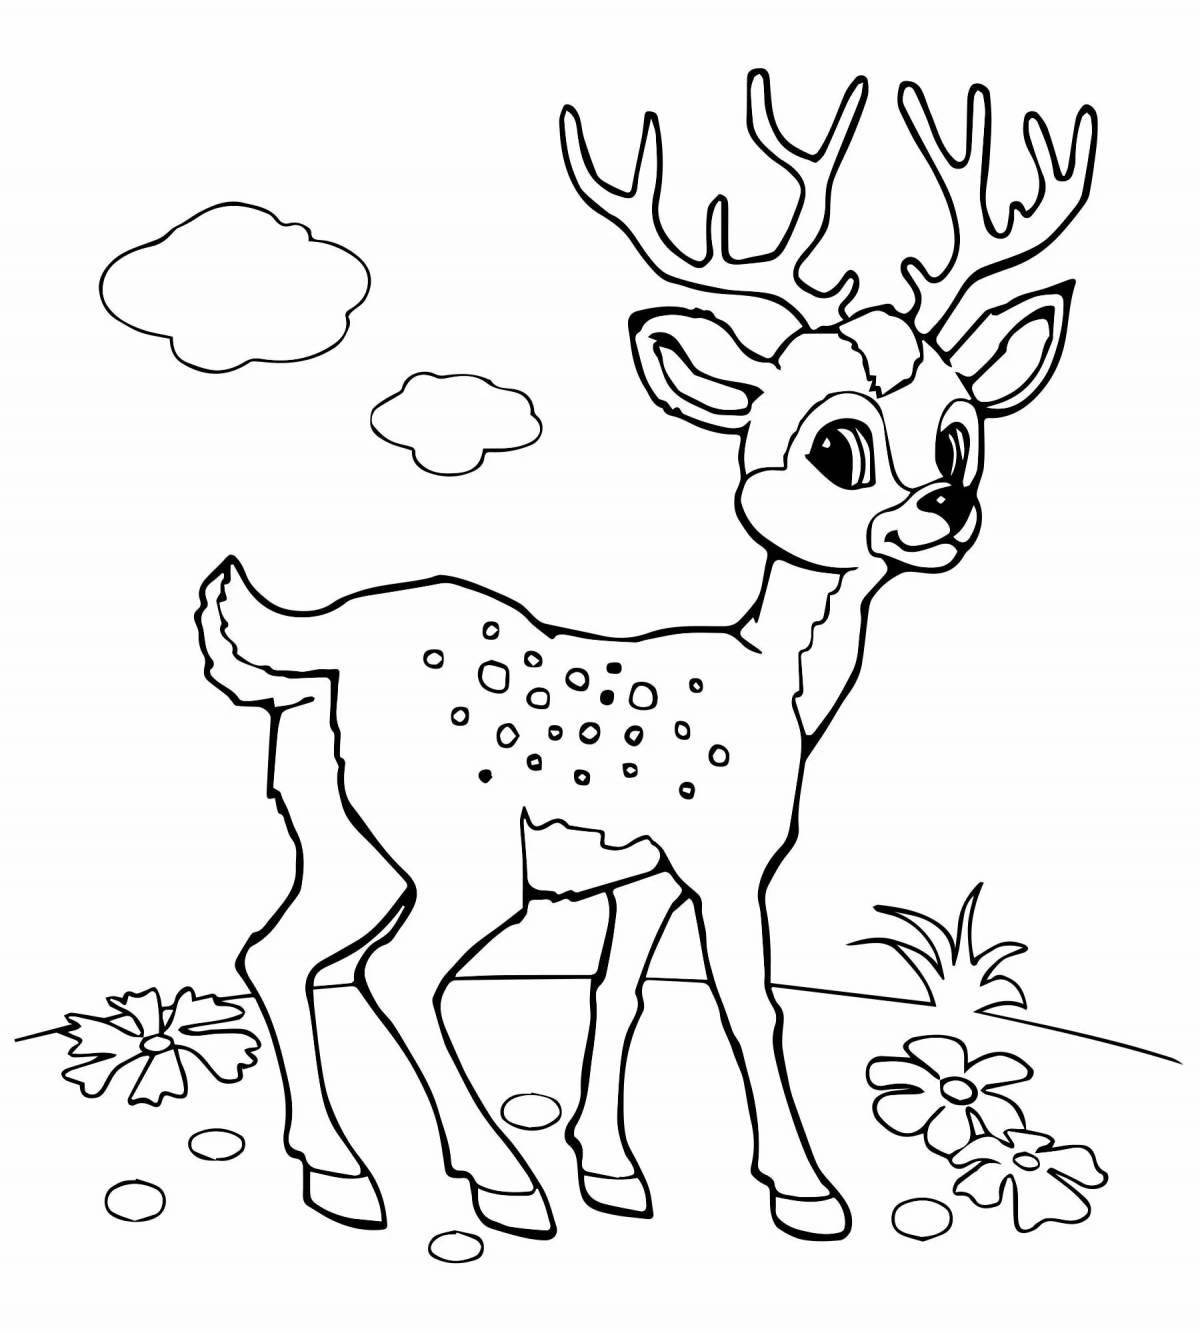 Glowing forest animals coloring book for kids